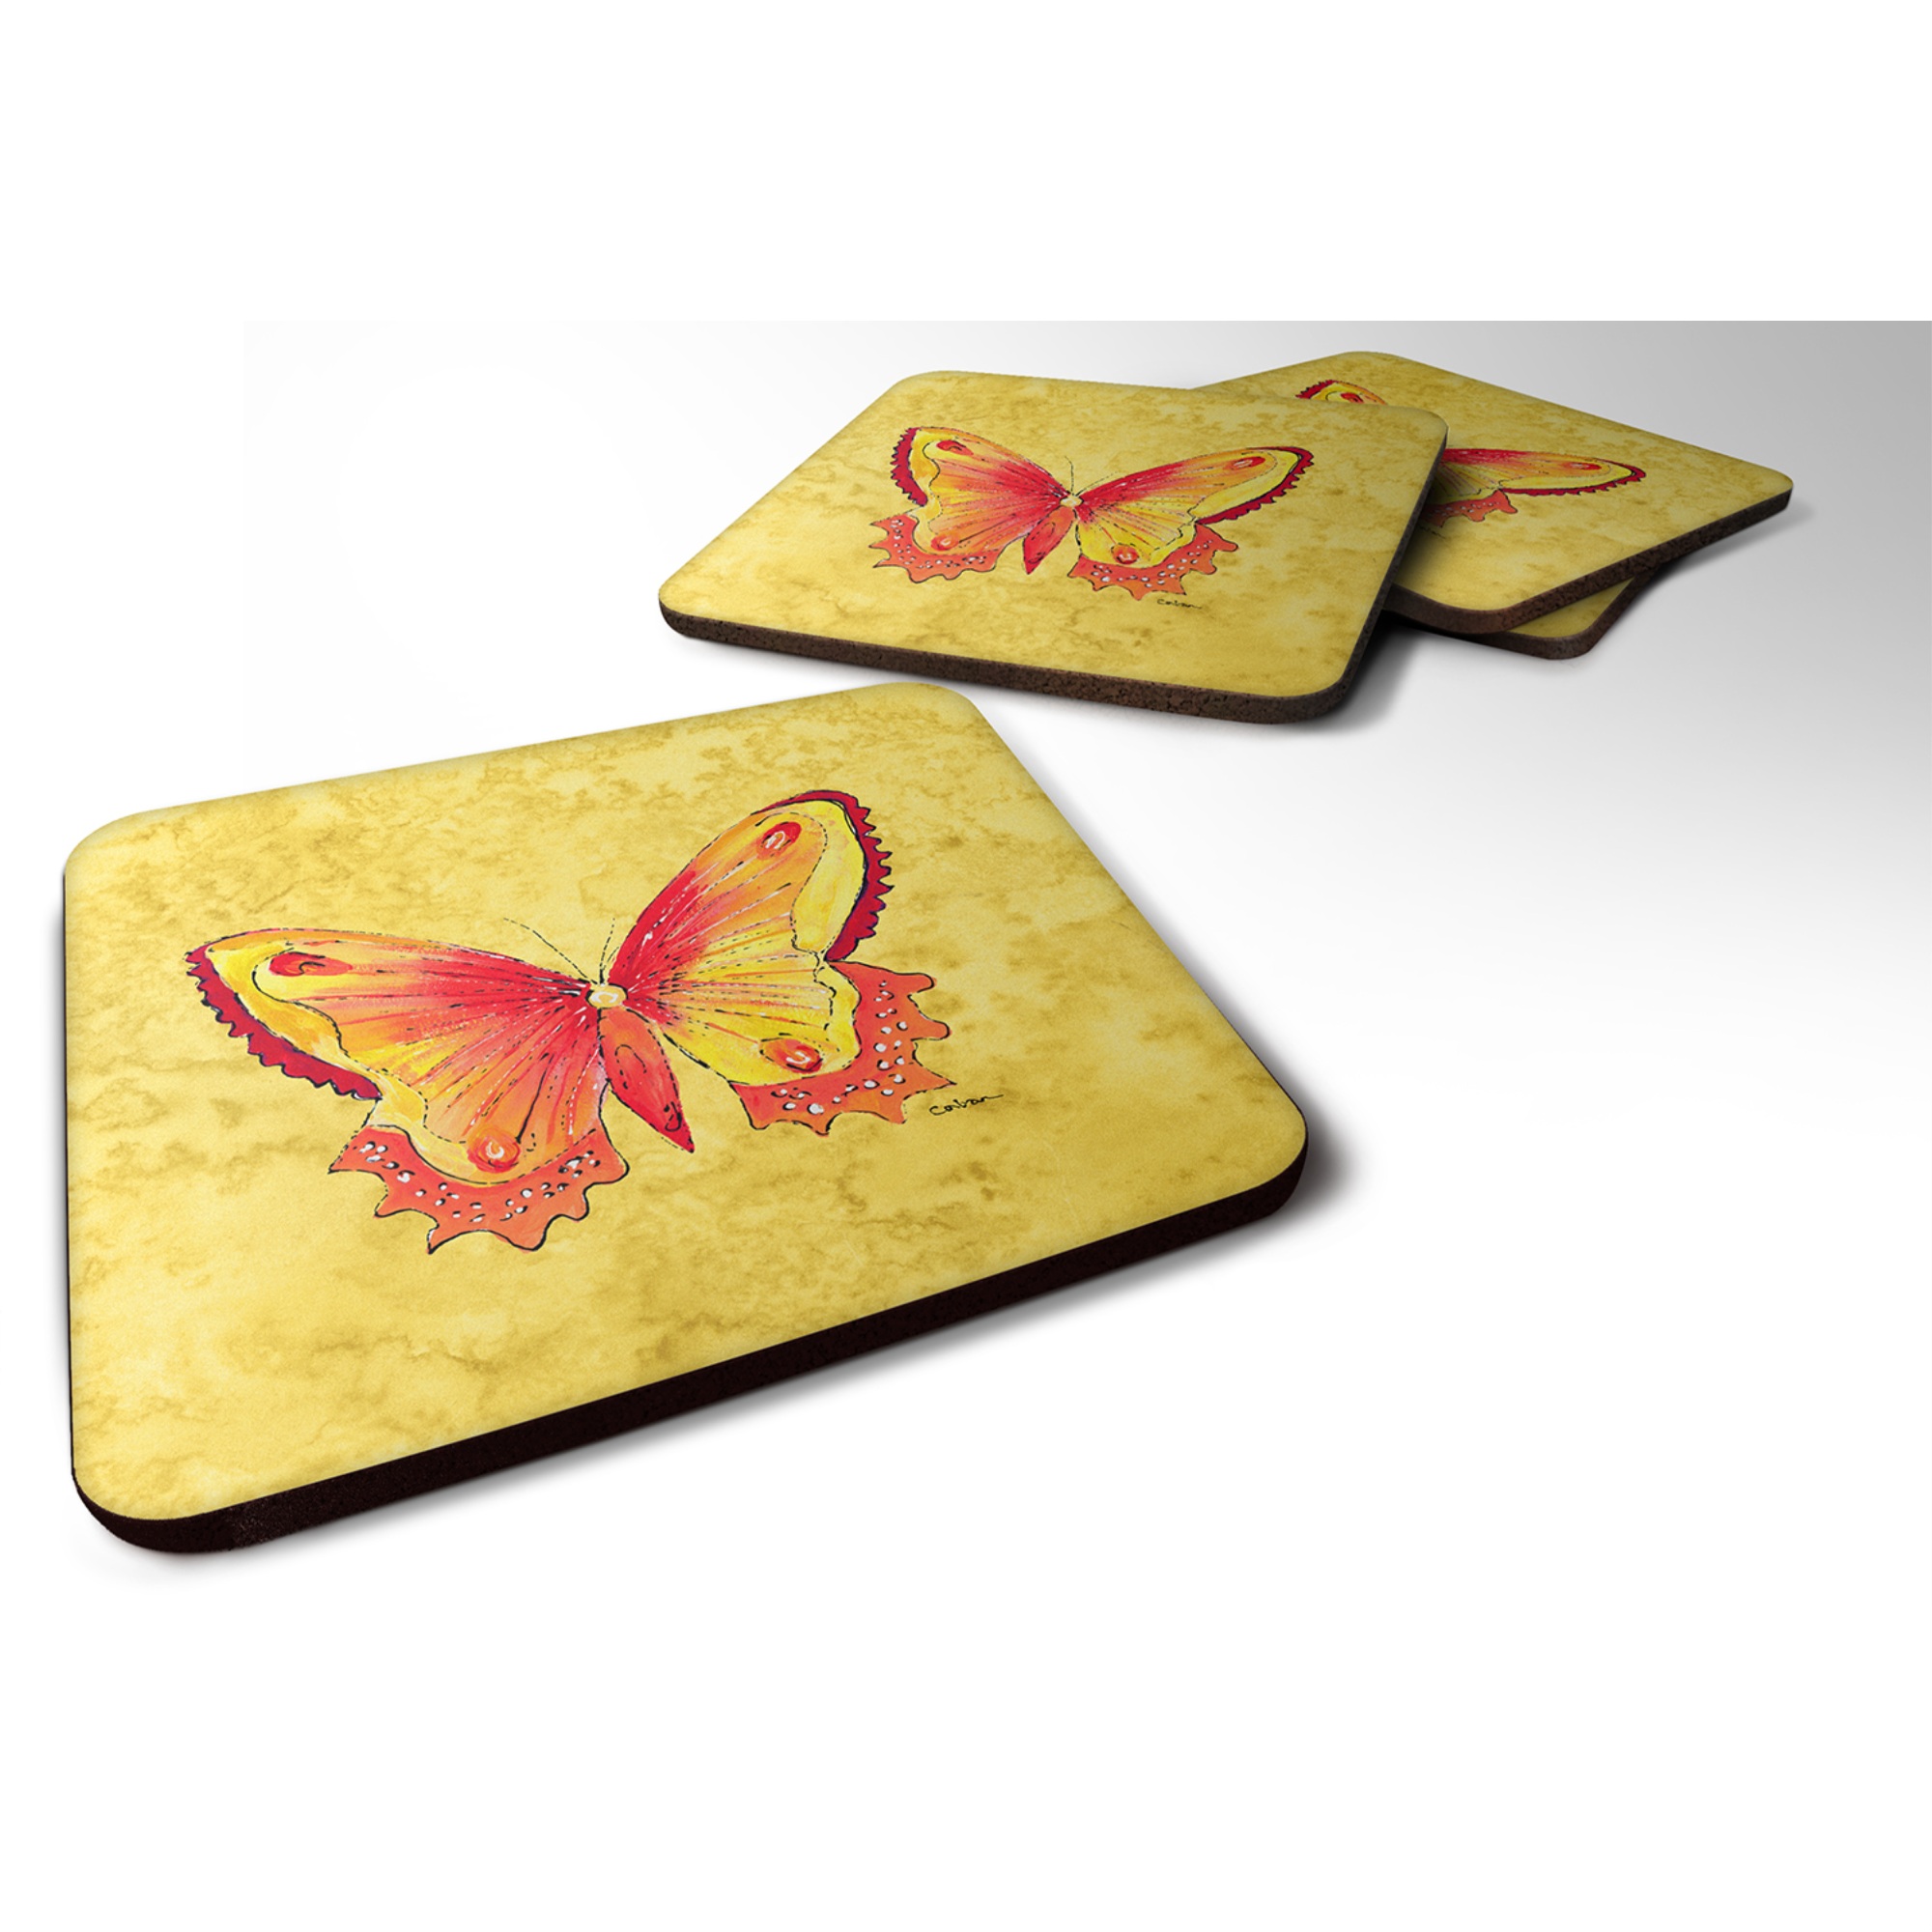 Caroline's Treasures "Caroline's Treasures 8857FC Butterfly on Yellow Foam Coasters (Set of 4), 3.5"" H x 3.5"" W, Multicolor"